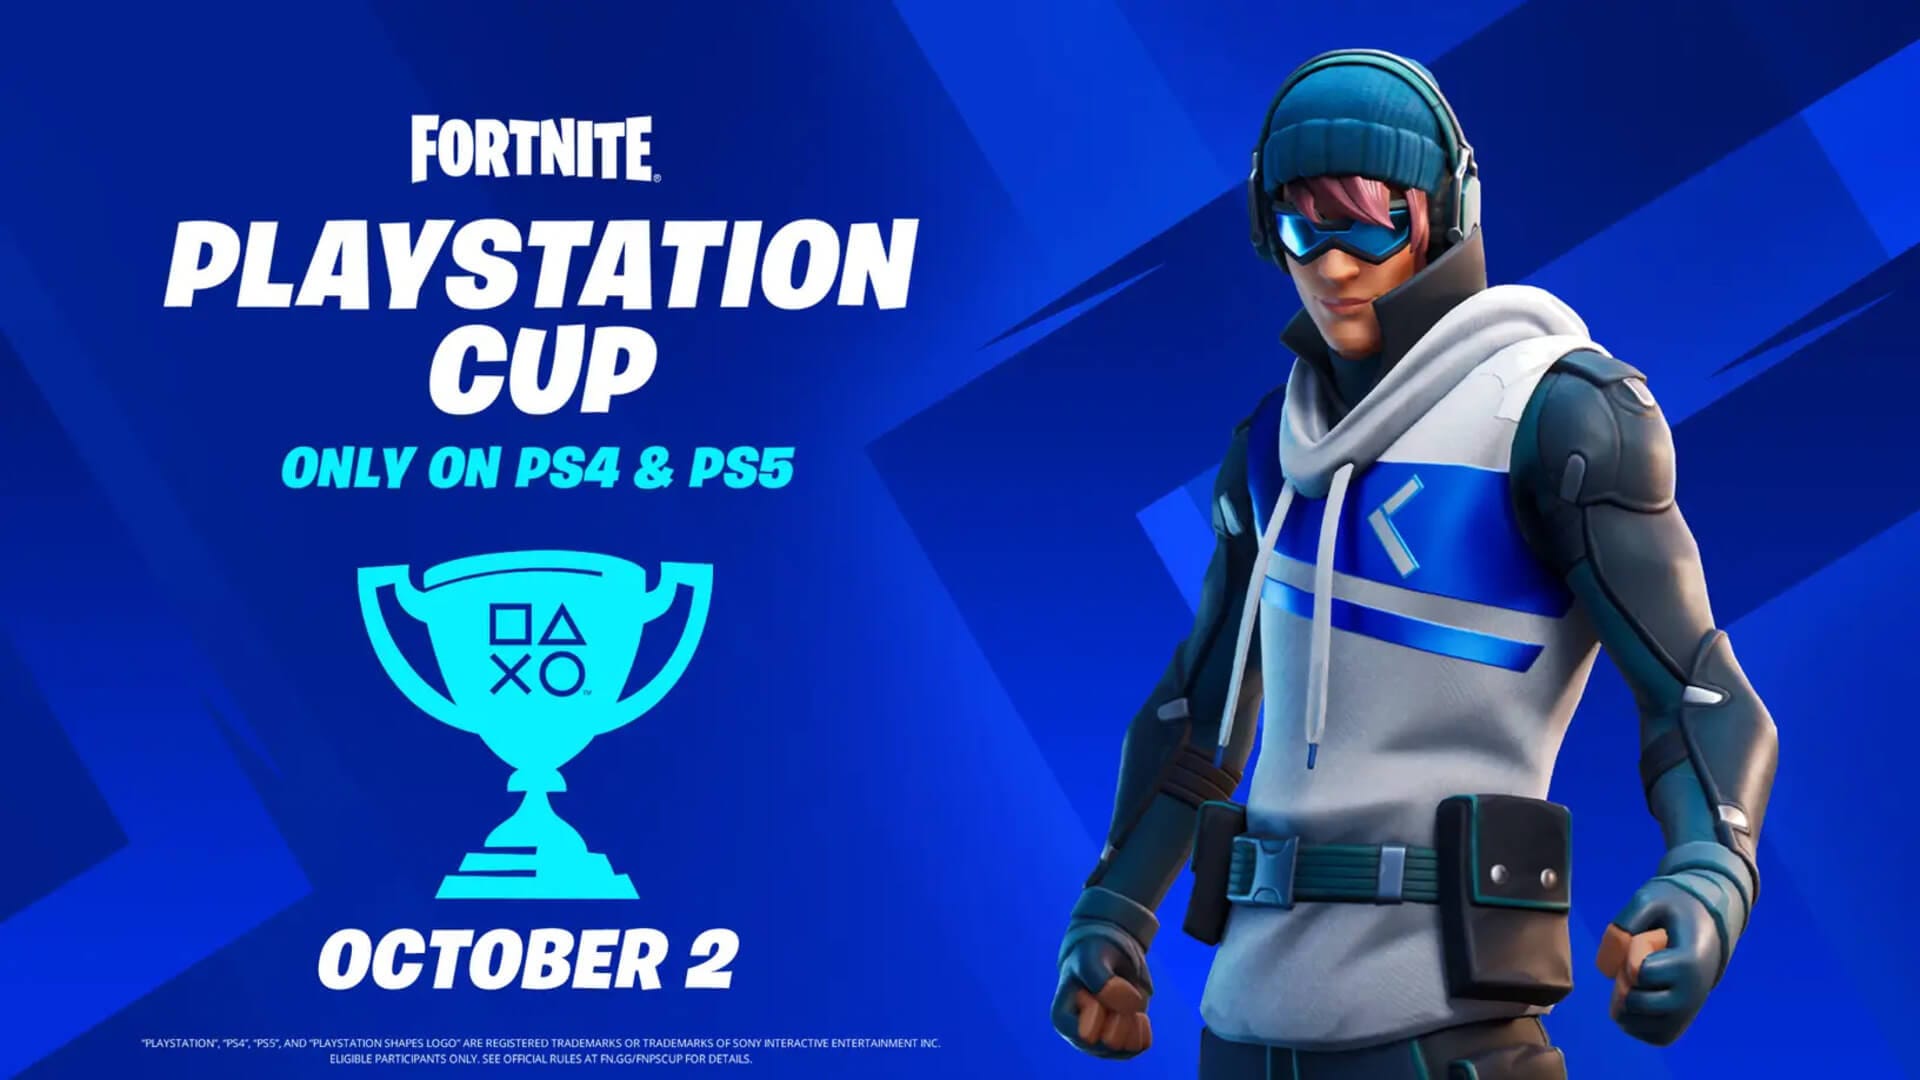 Fortnite PlayStation Cup Offers $110,000 Prize Pool